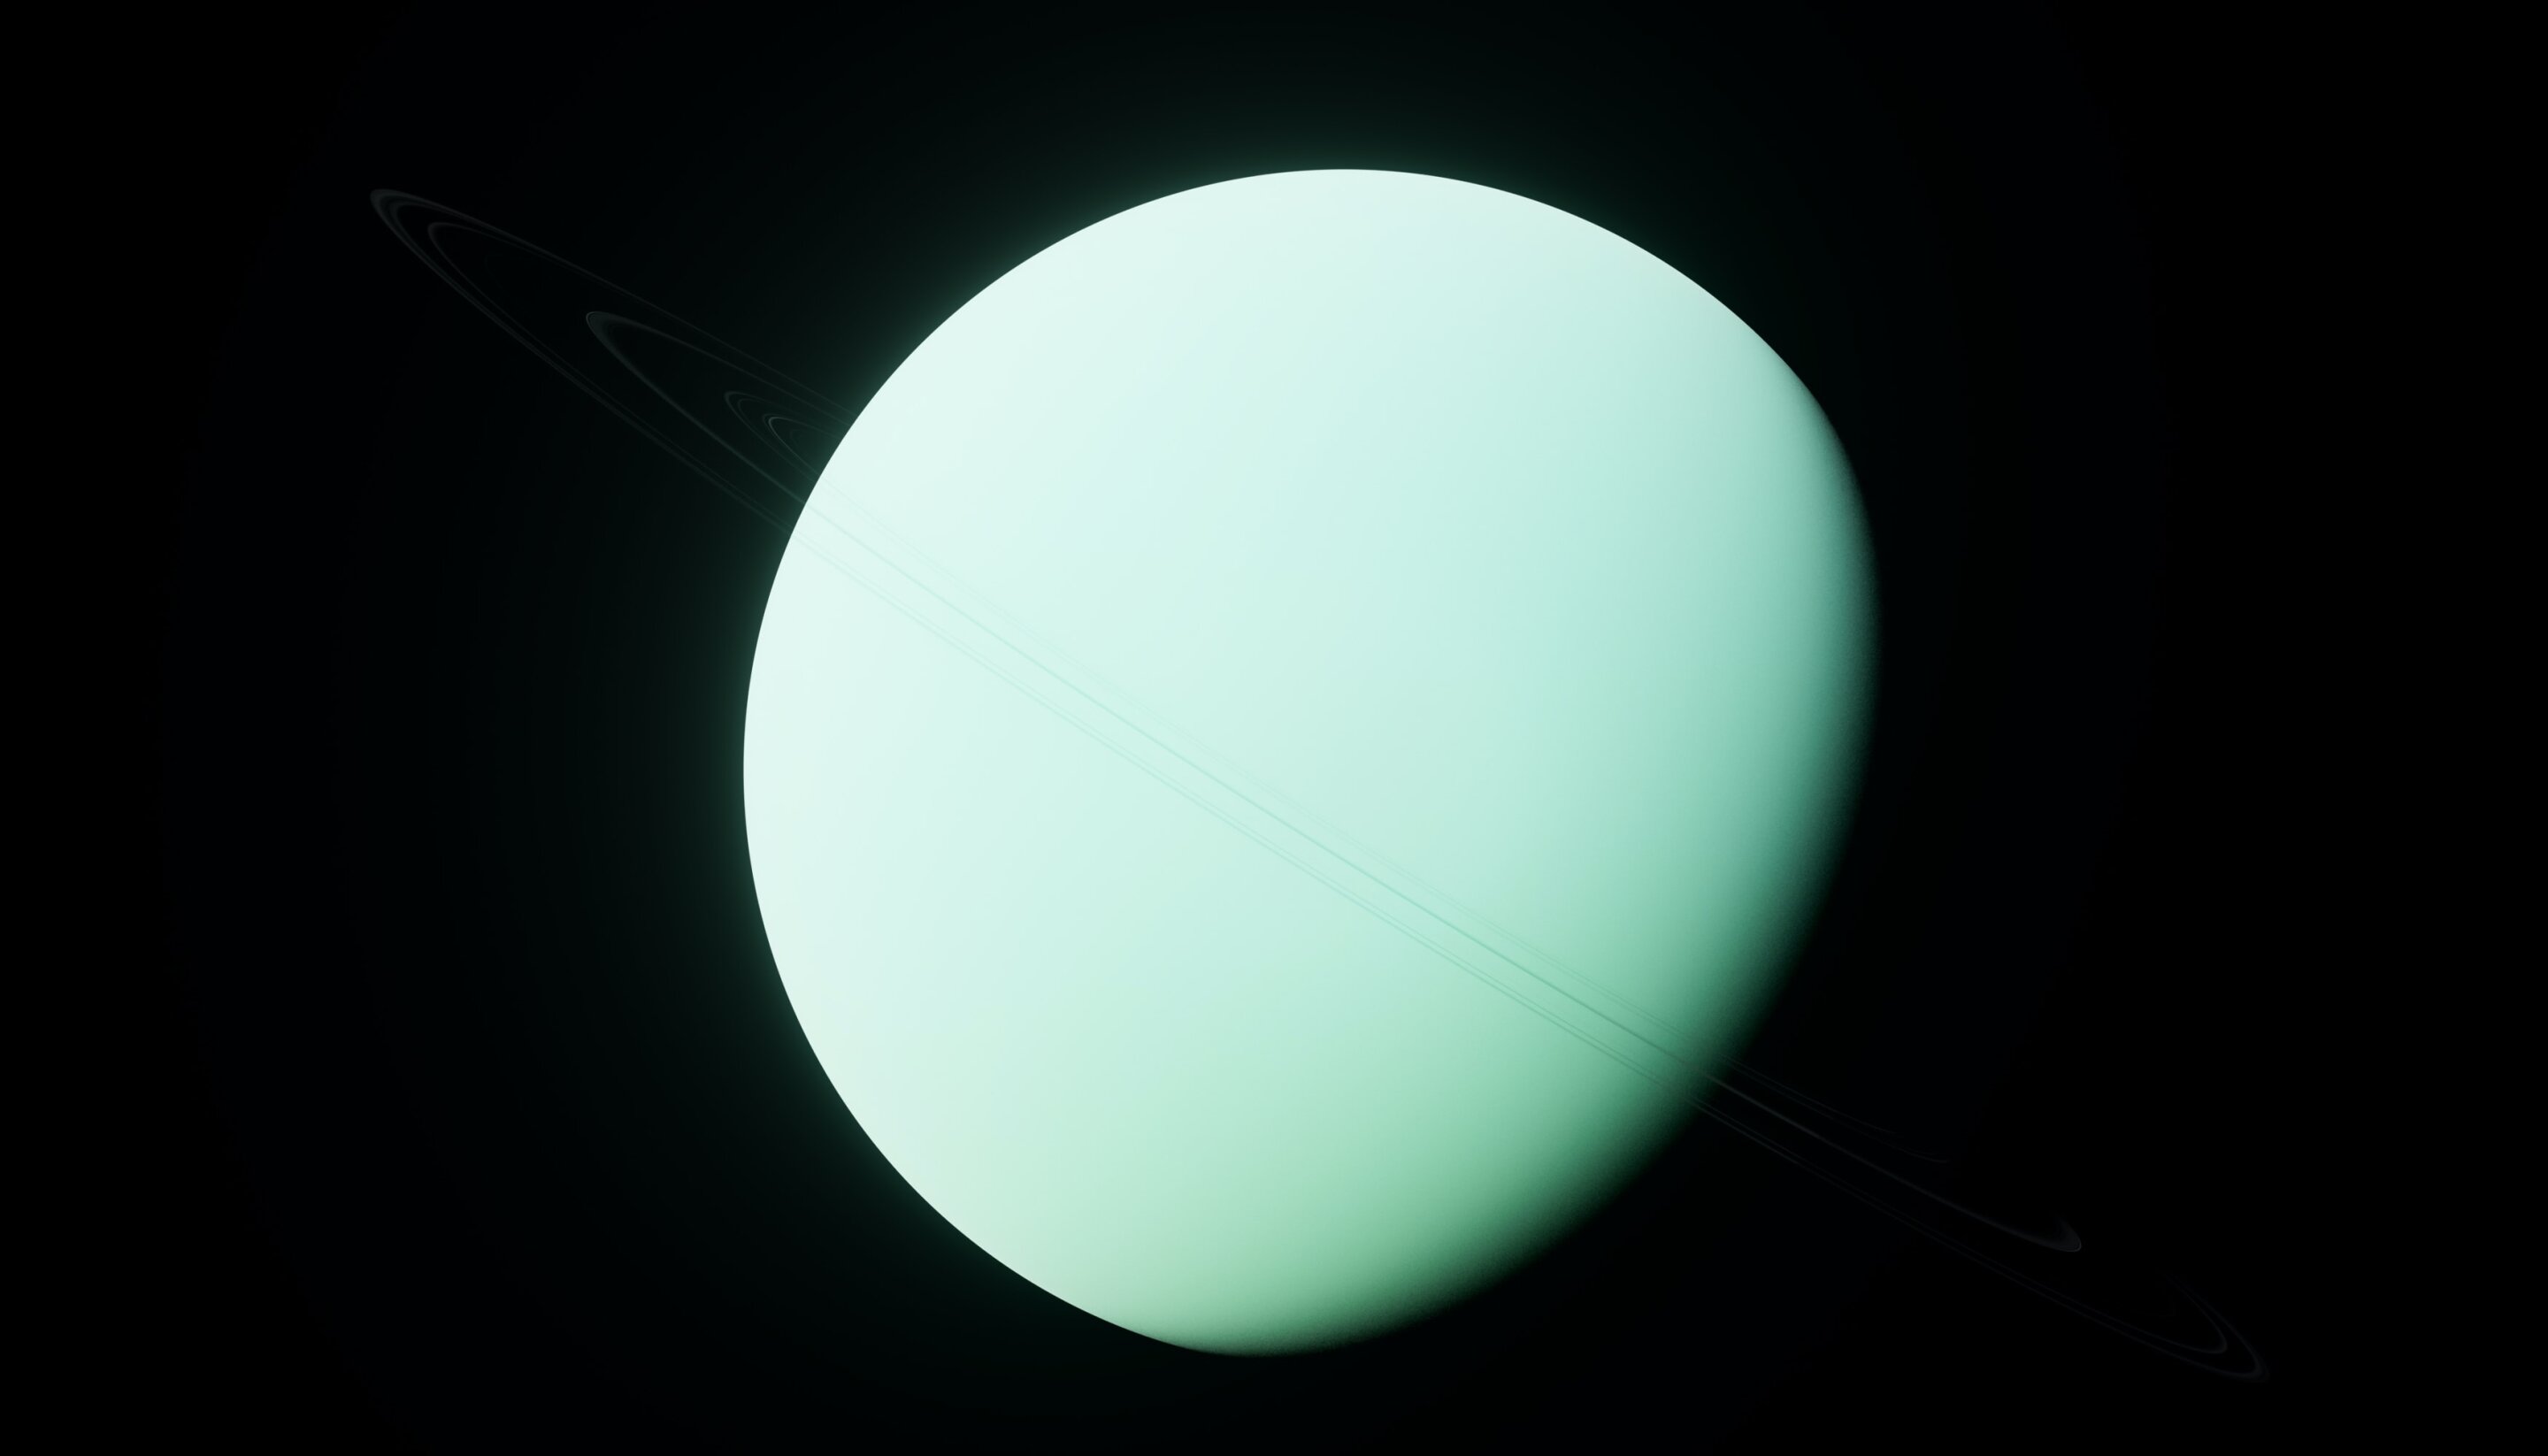 A possible explanation for Uranus's odd tilt angle and opposite spin